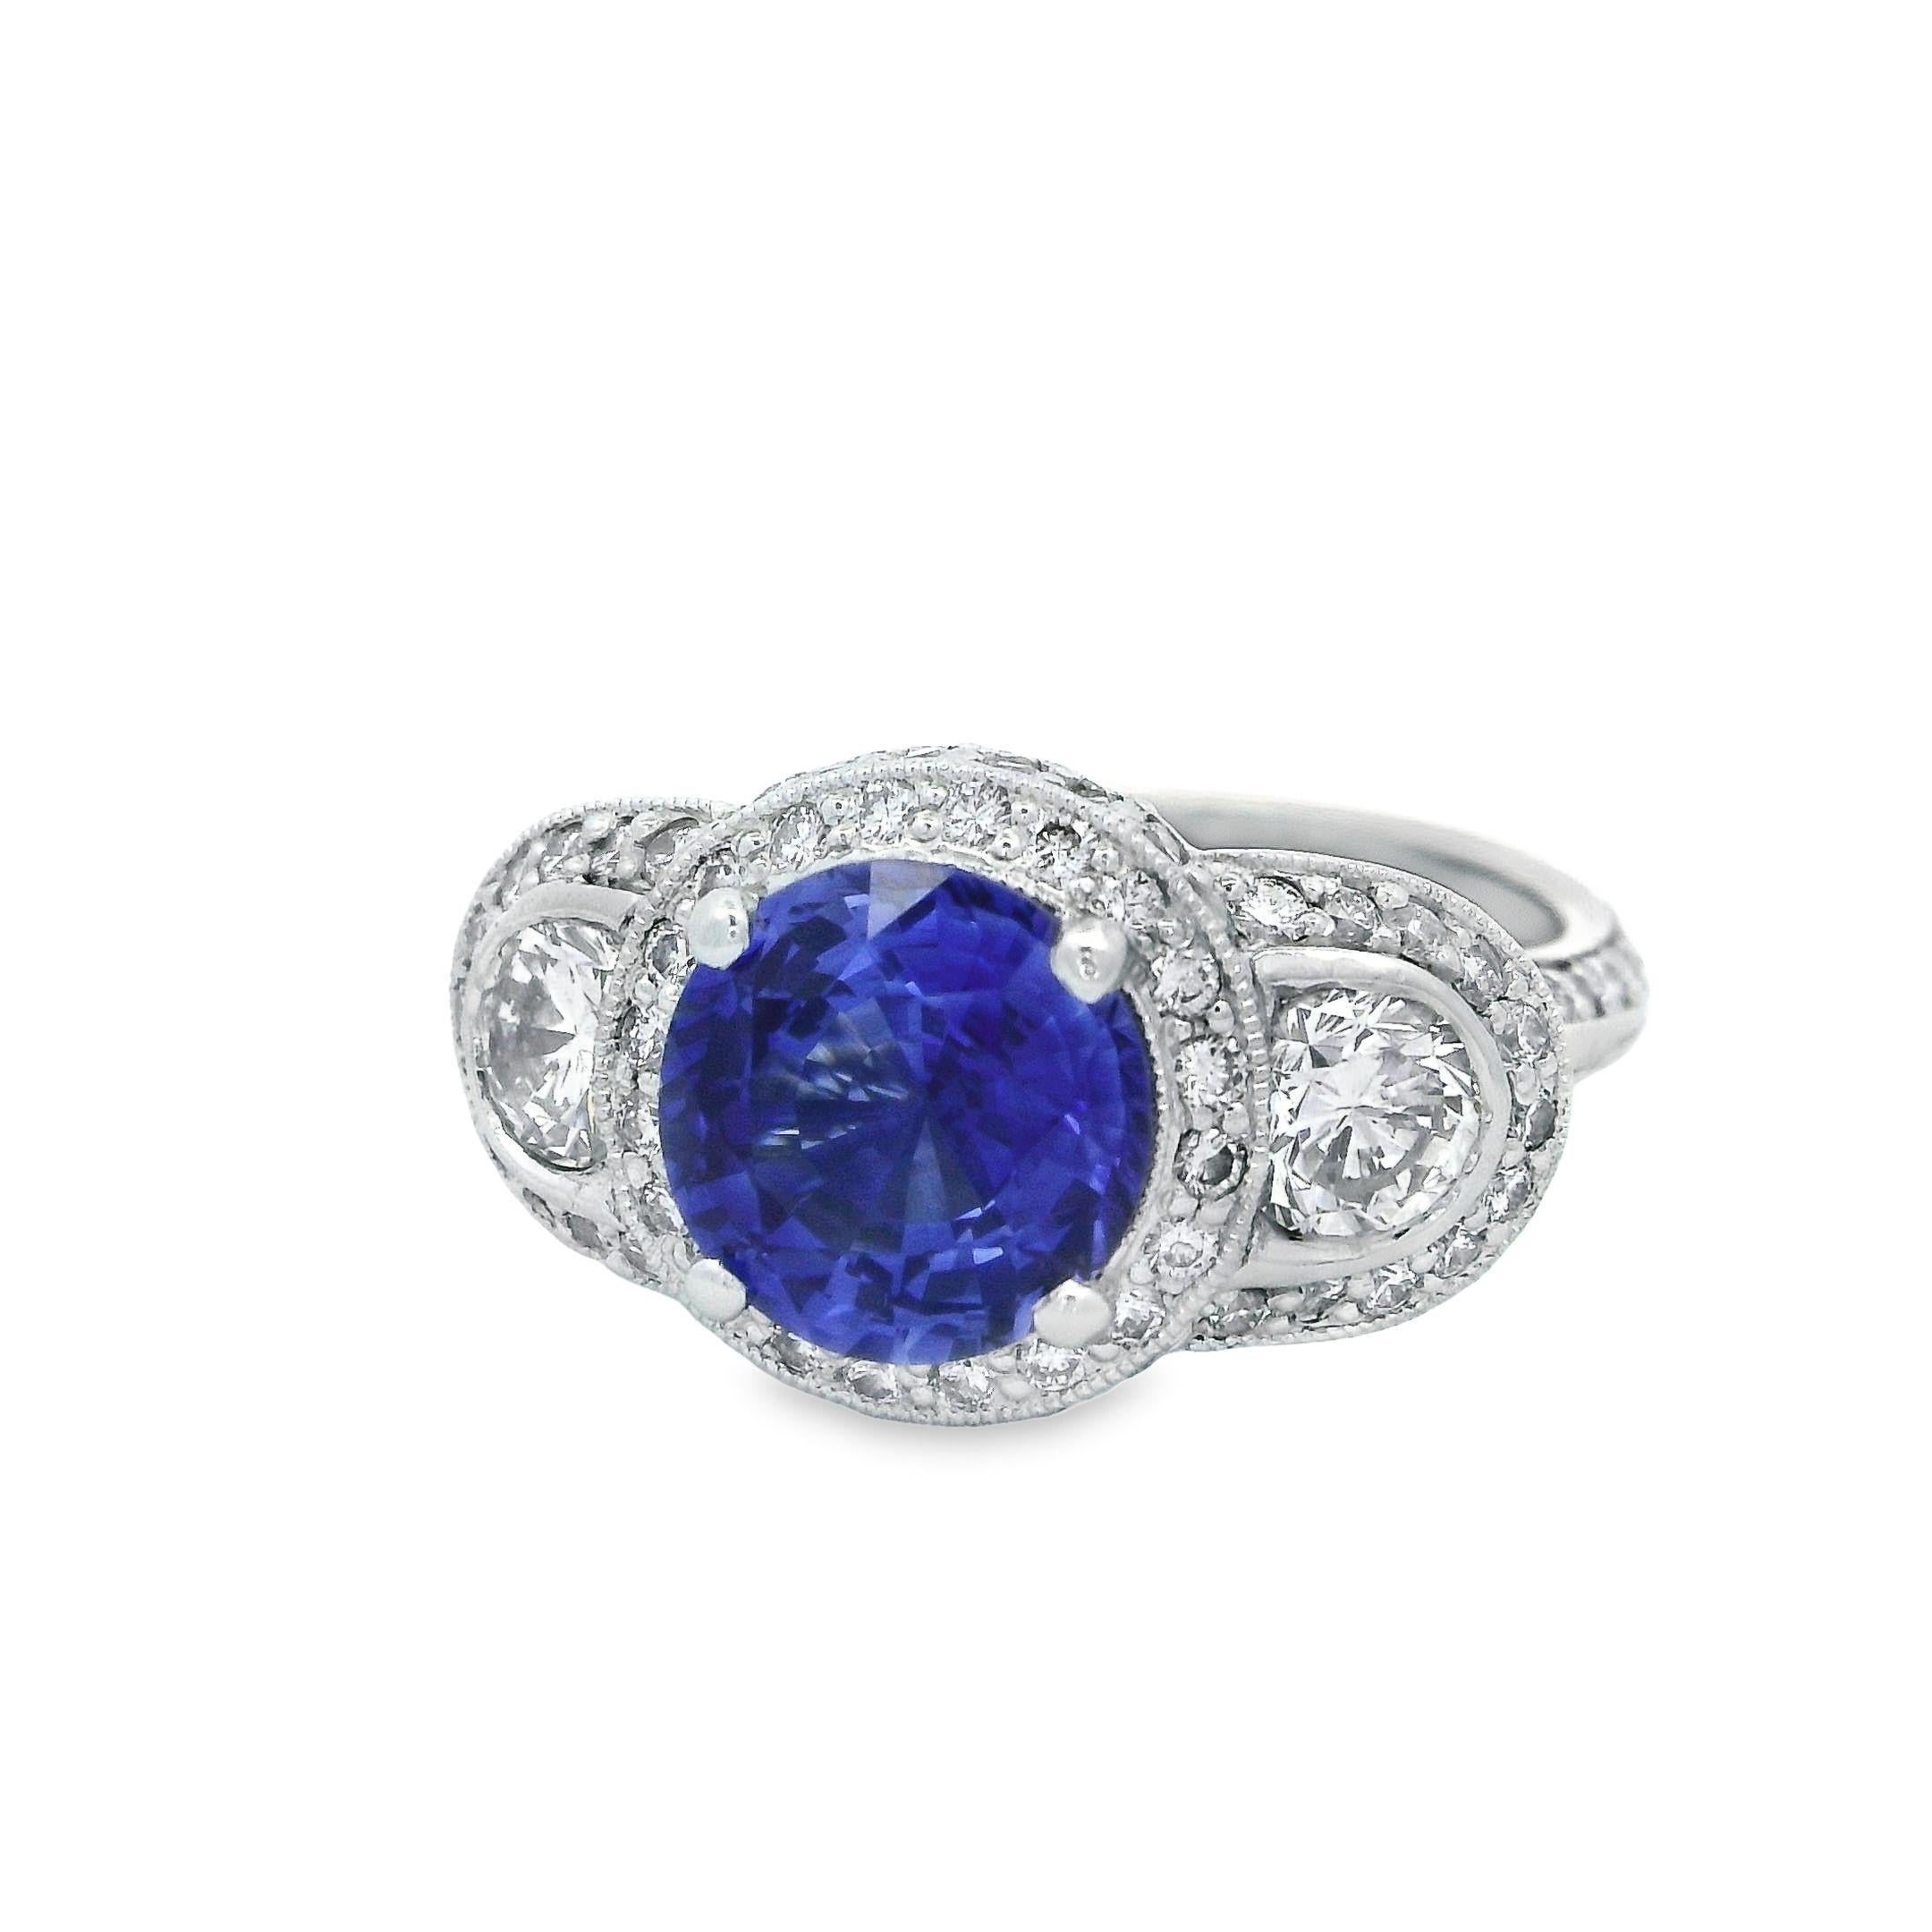 Alex & Co signature AGTA certified stunning 2.72ct round blue sapphire has no indications of heat treatment.  This exquisite ring features 2 round brilliant cut diamond weighing a total weight 0.74ct on the sides bezel set. The 3 stones are